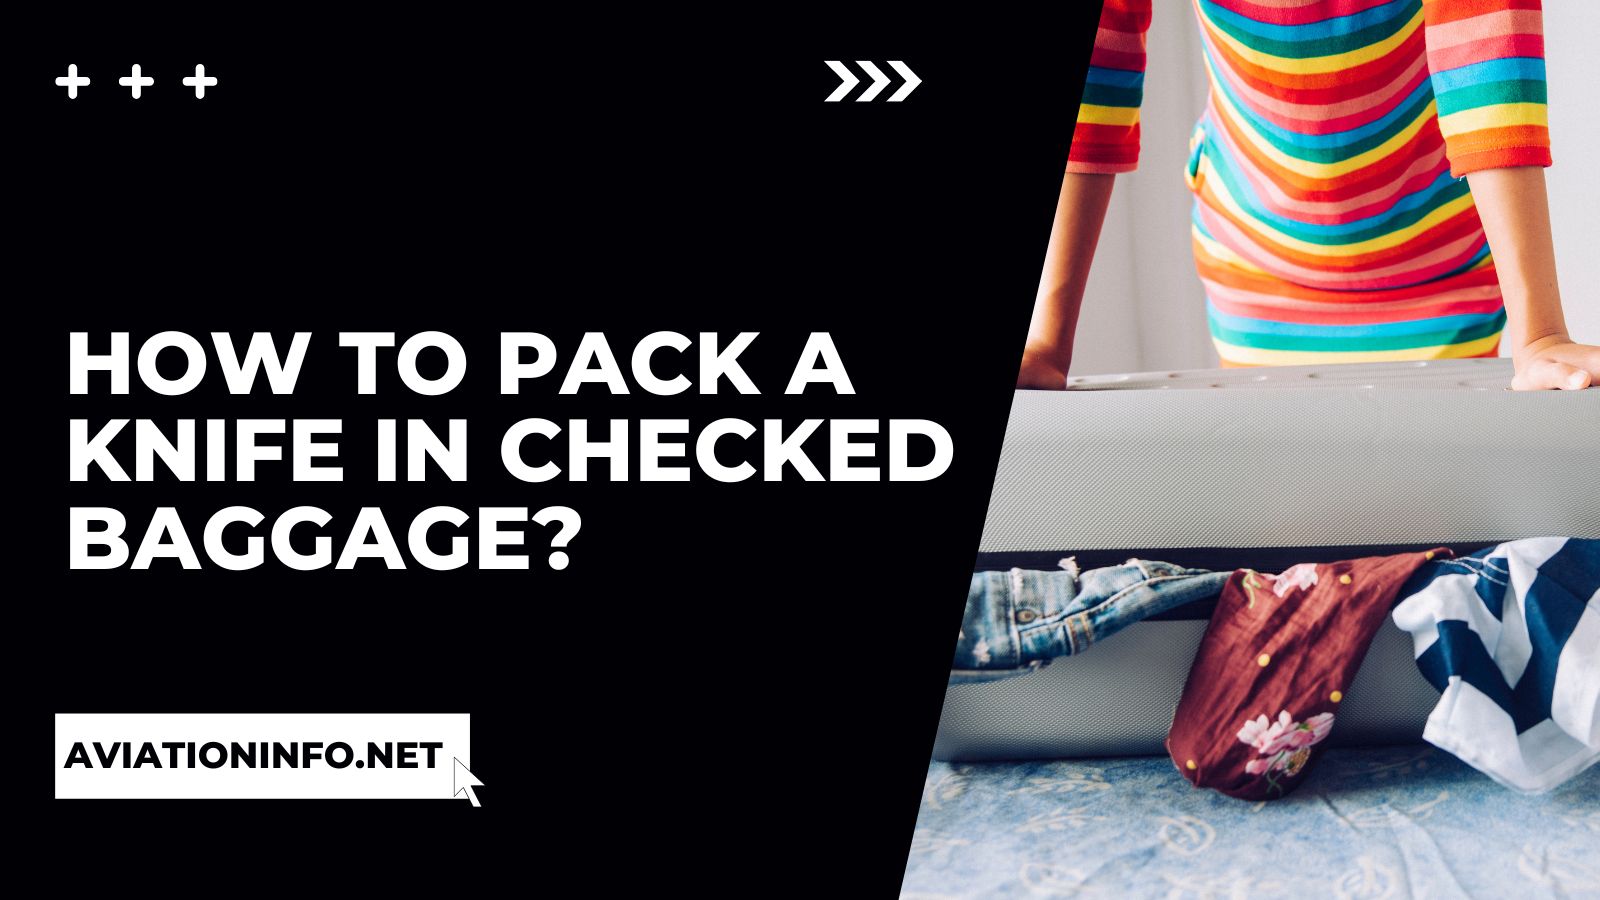 How to Pack a Knife in Checked Baggage